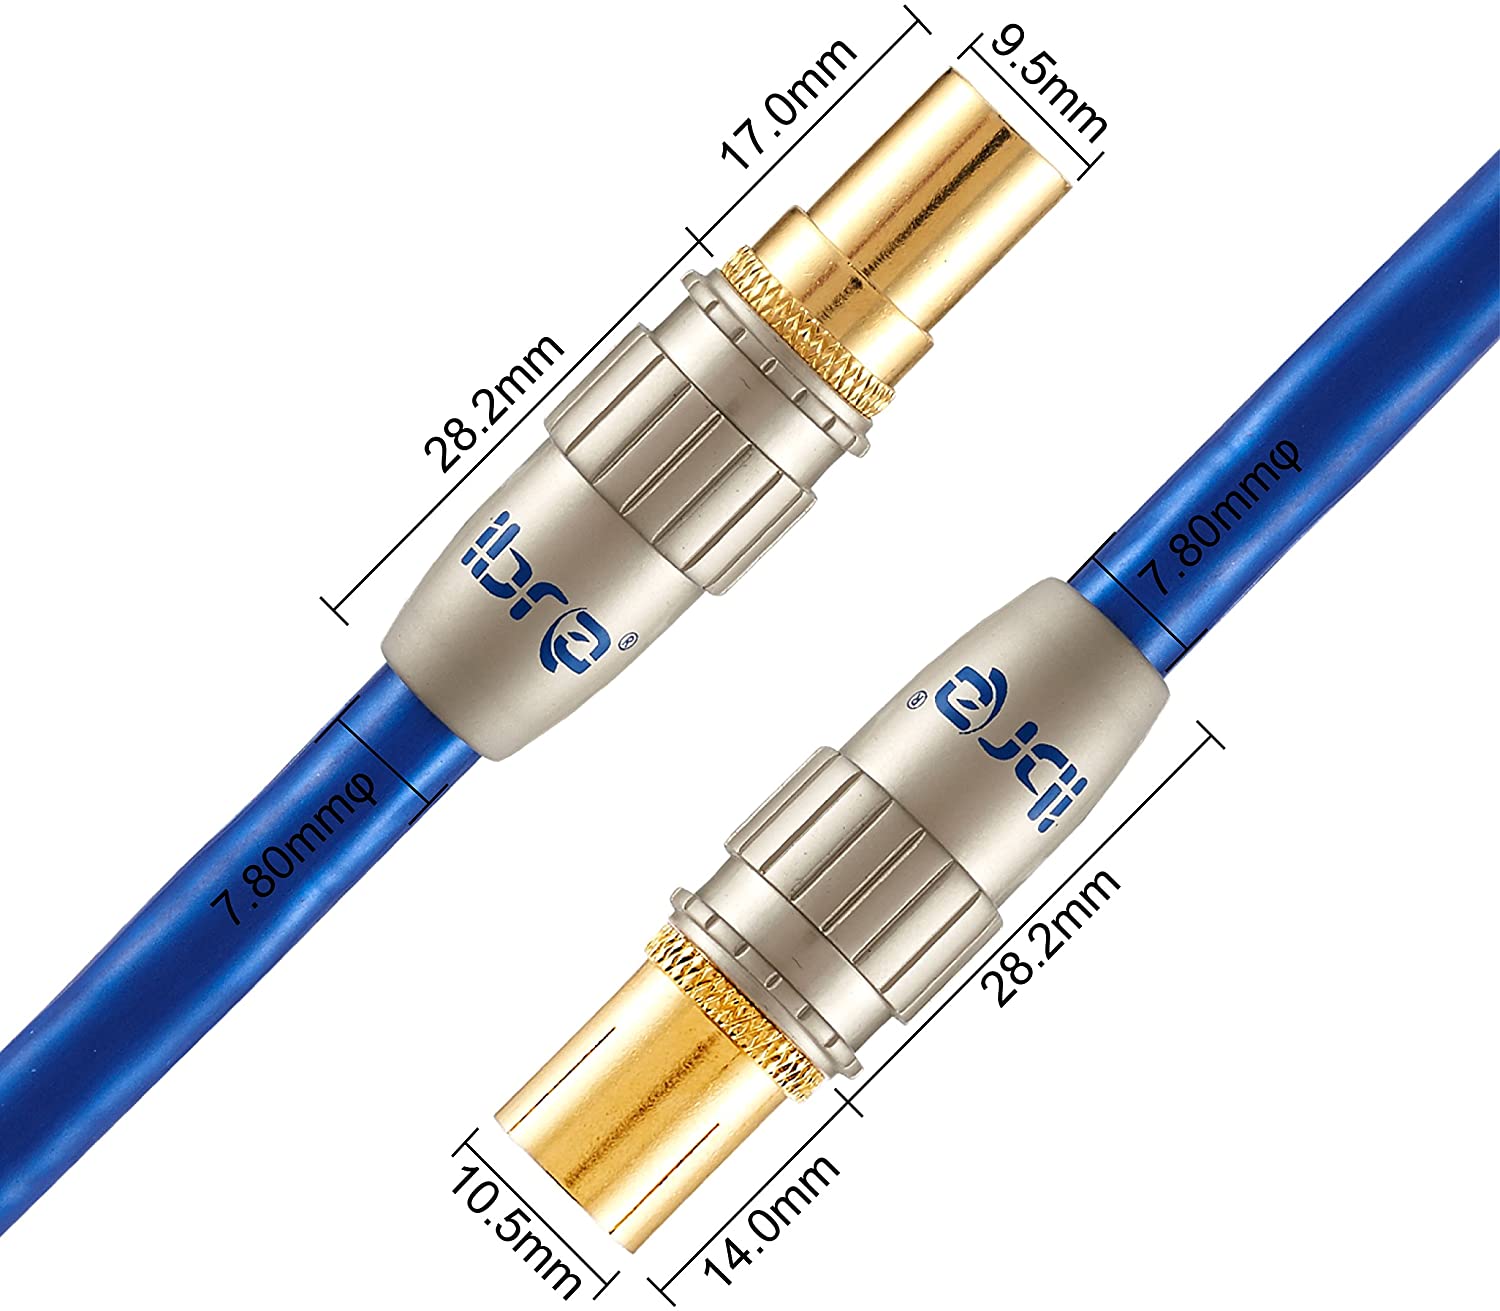 Pure OFC RF RG6 TV Aerial Coax Lead Gold Male to Female Extension Premium Cable - 10m IBRA Blue Gold Series